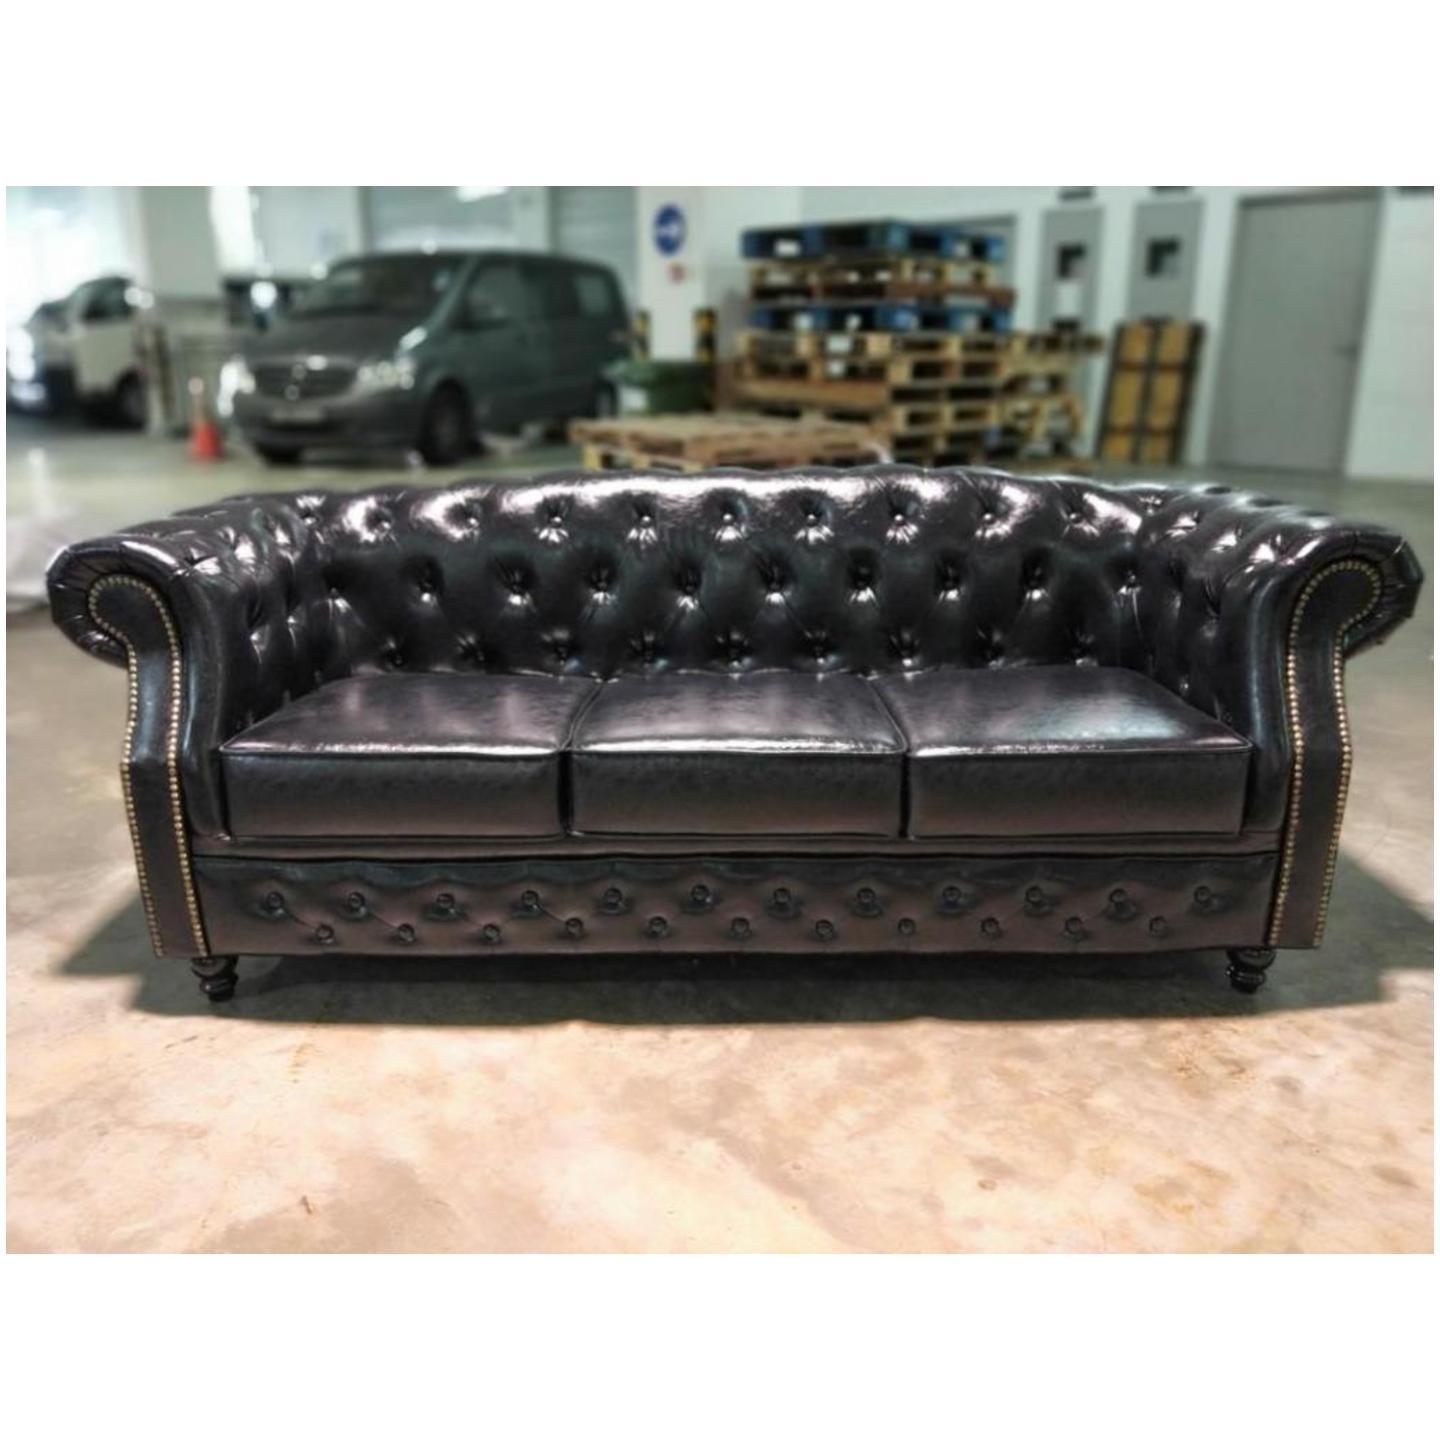 PRE ORDER BOTTEVA 3 Seater Chesterfield Sofa in GLOSS BLACK PU - Estimated Delivery in End August 2022